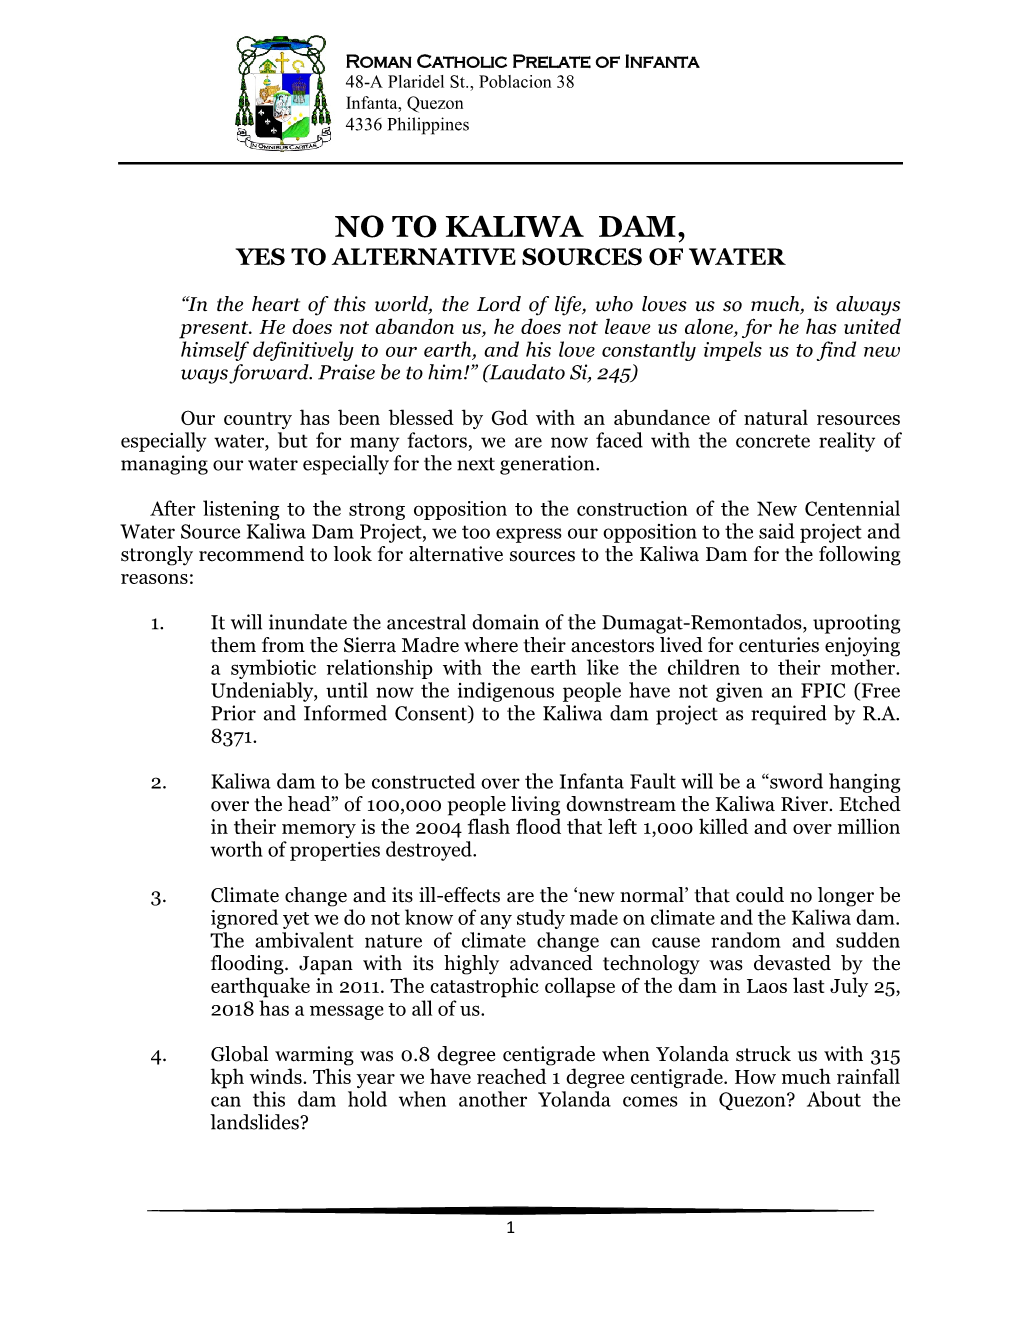 No to Kaliwa Dam, Yes to Alternative Sources of Water